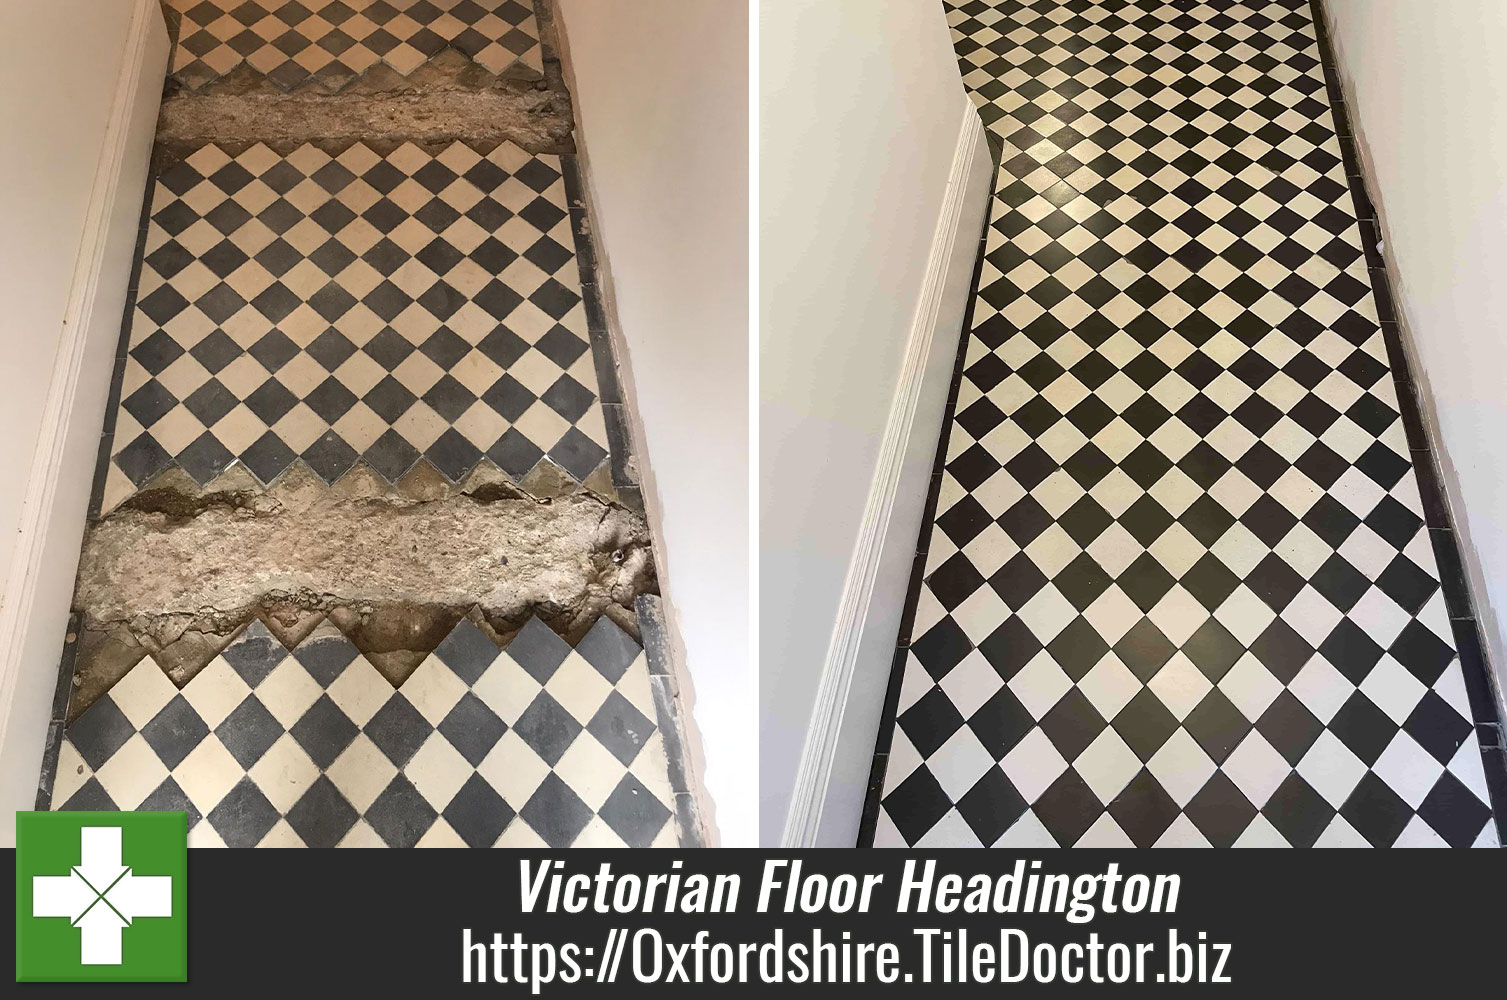 Restoring the Appearance of Original Victorian Floor Tiles with Diamond Burnishing Pads